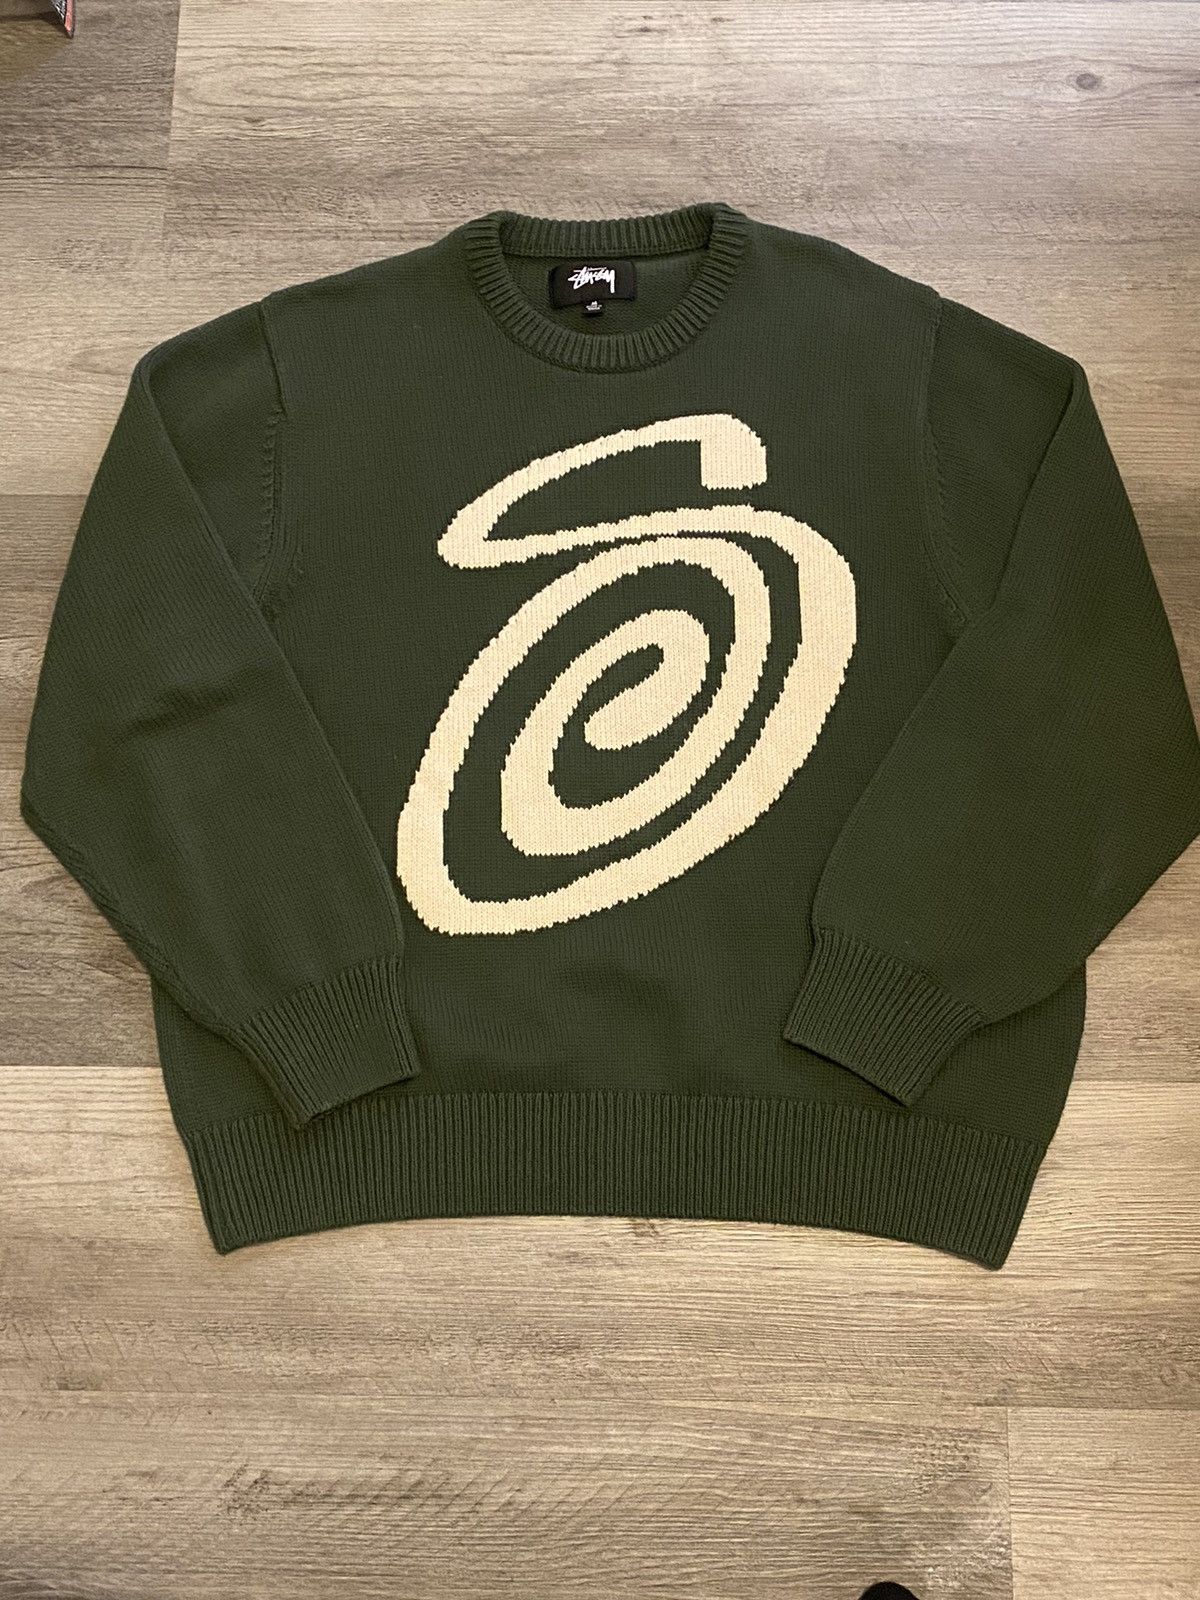 Nike STUSSY CURLY S SWEATER | Grailed